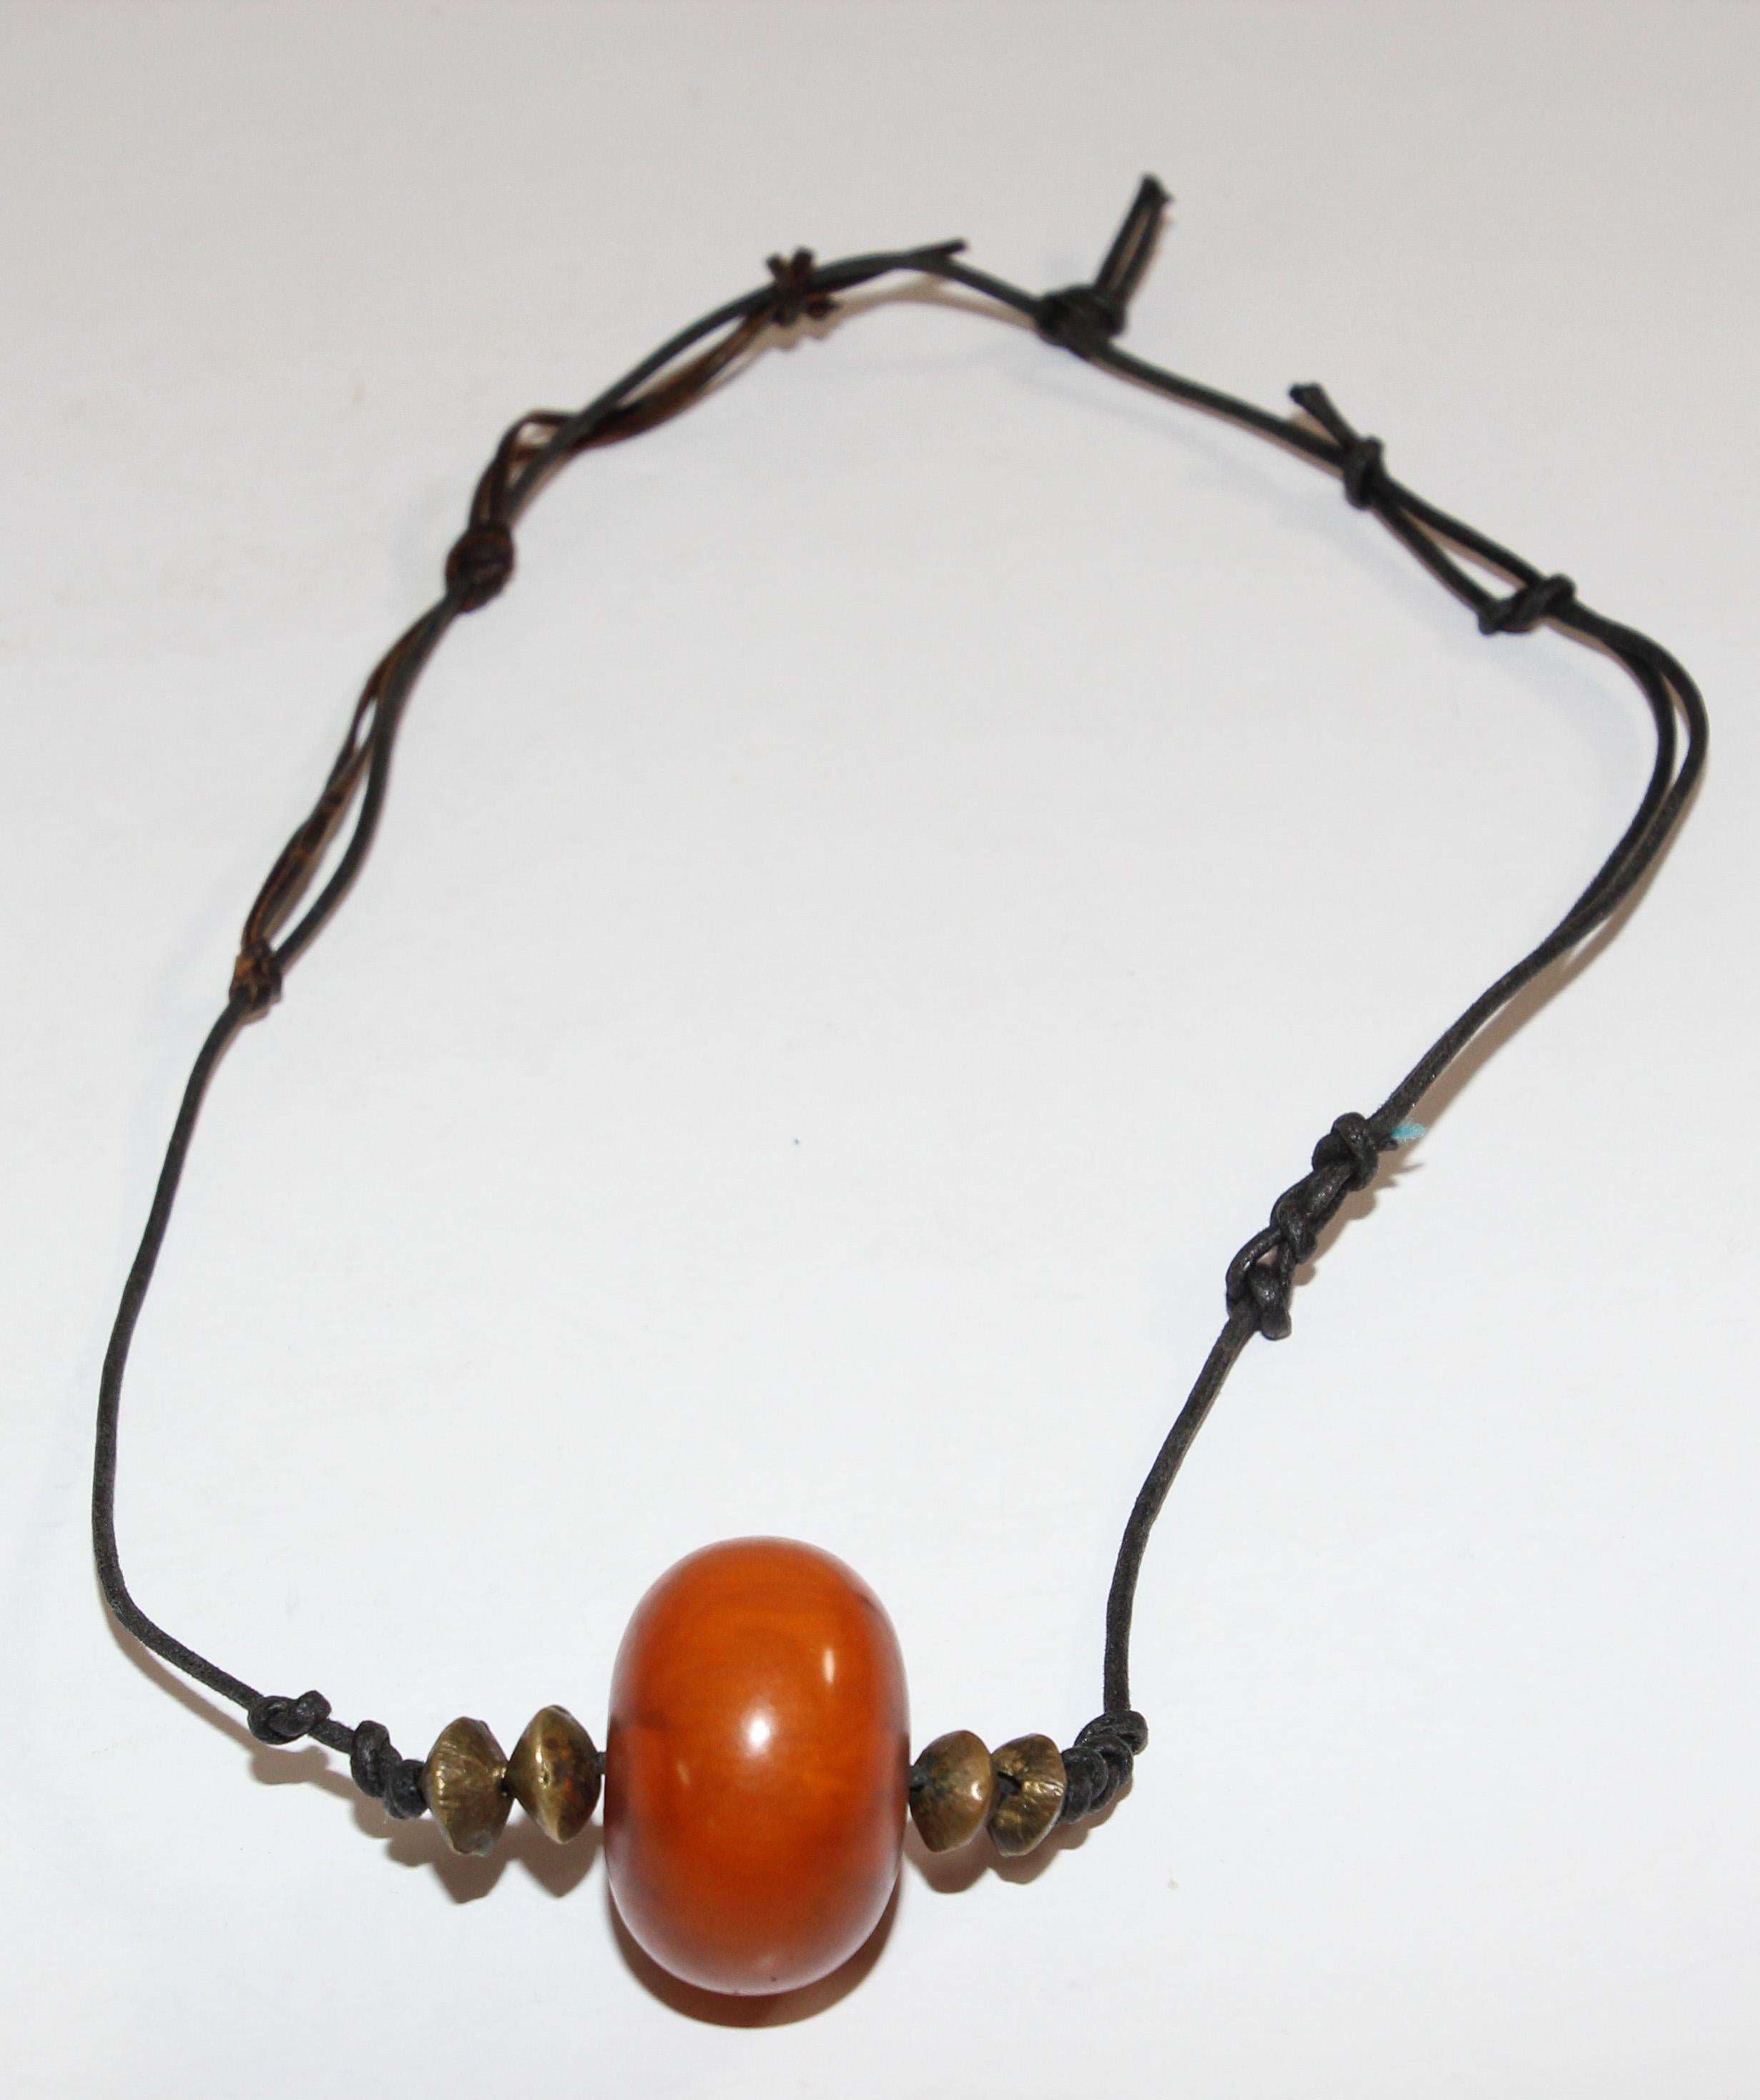 Details about   Berber amber necklace,strand Amber Moroccan vintage Handcrafted Jewelry.07 